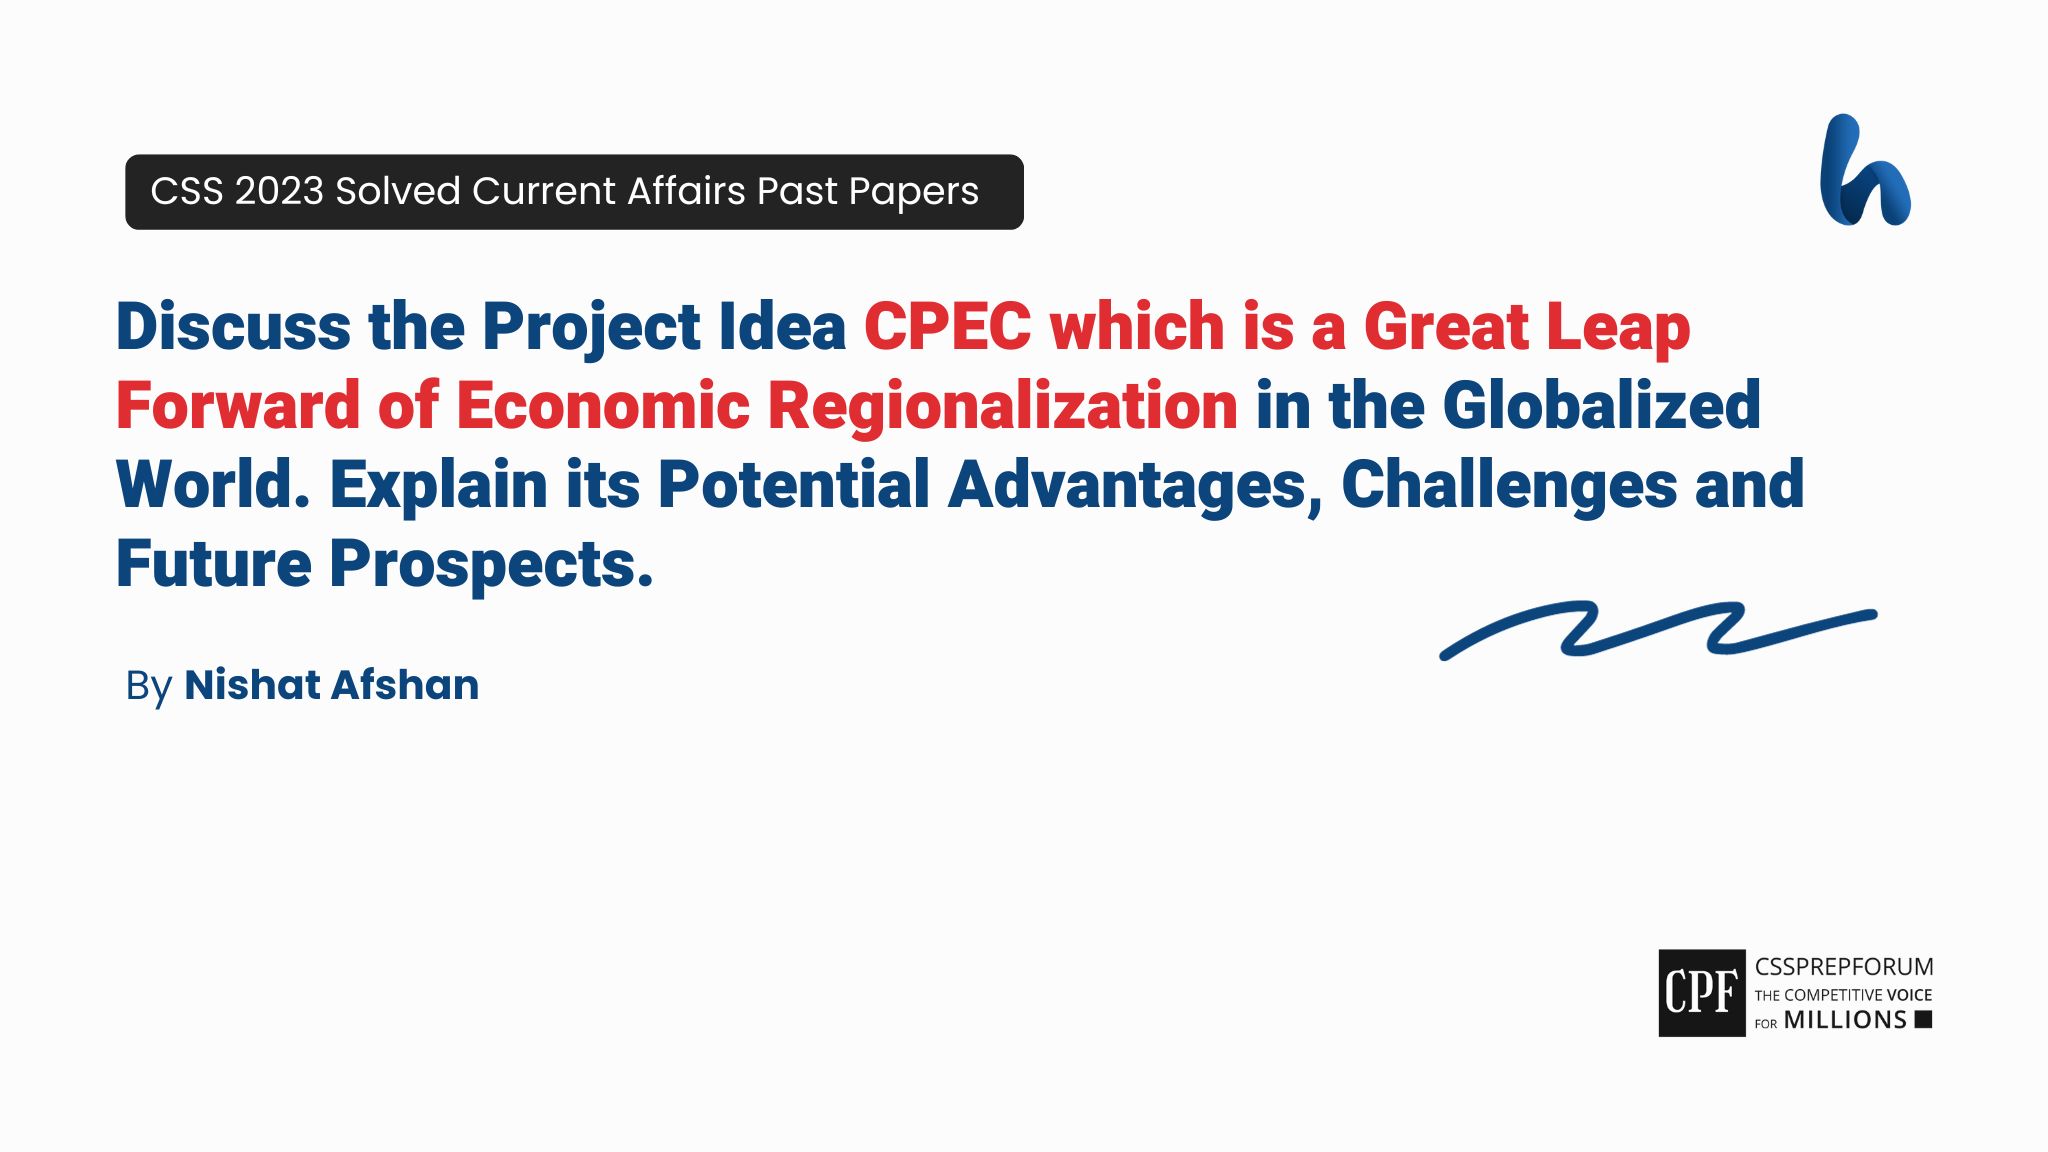 Discuss the Project Idea CPEC which is a Great Leap Forward of Economic Regionalization in the Globalized World. Explain its Potential Advantages, Challenges and Future Prospects.